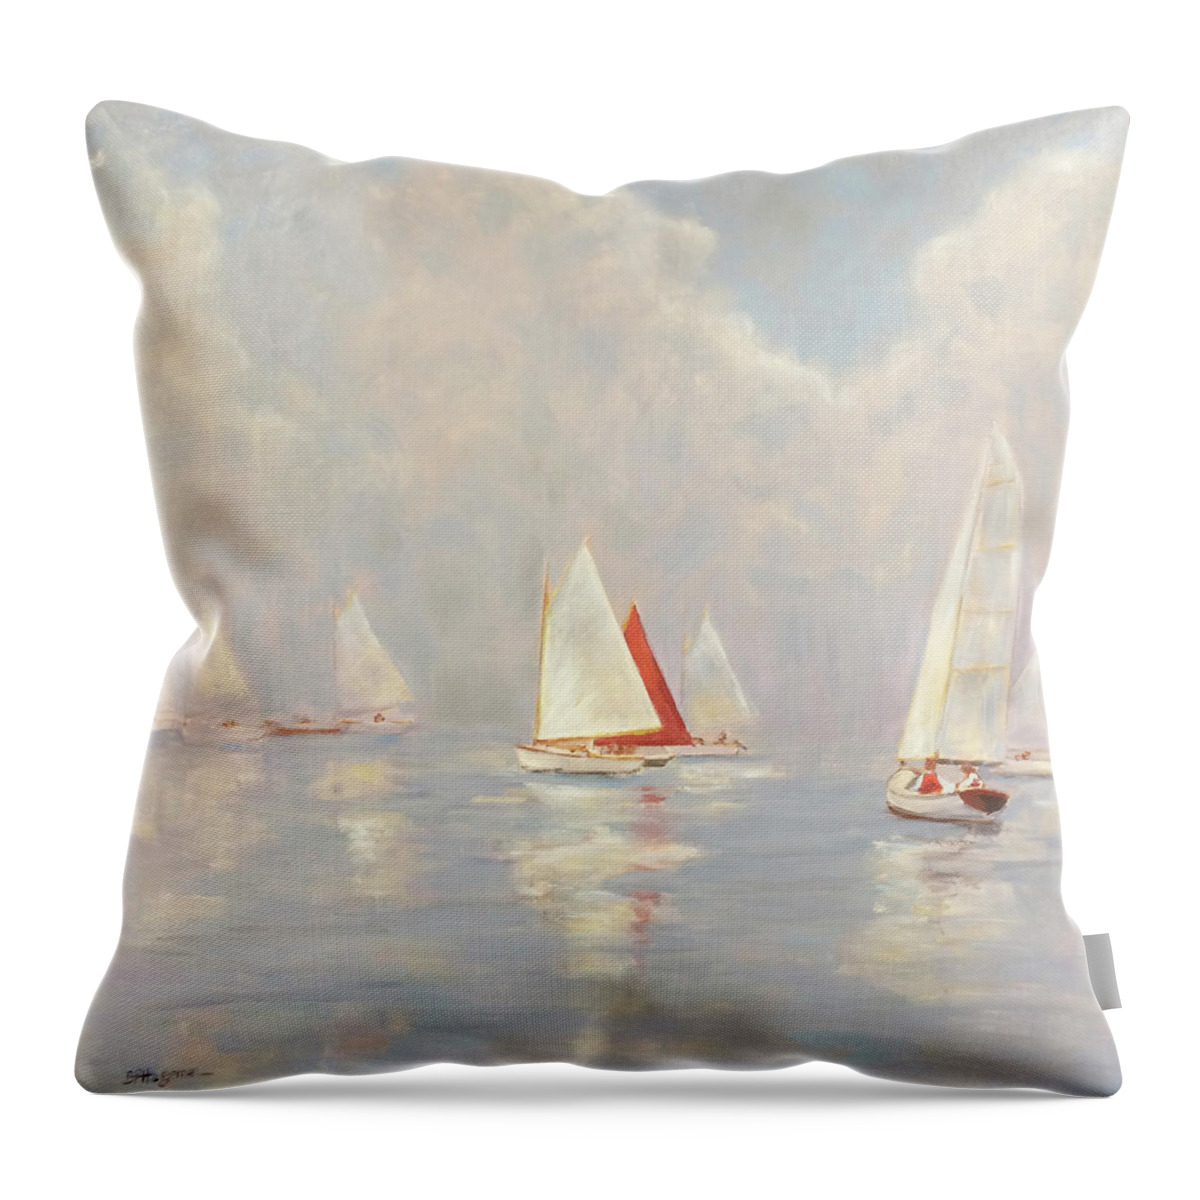 Catboats Throw Pillow featuring the painting Through The Mist by Barbara Hageman